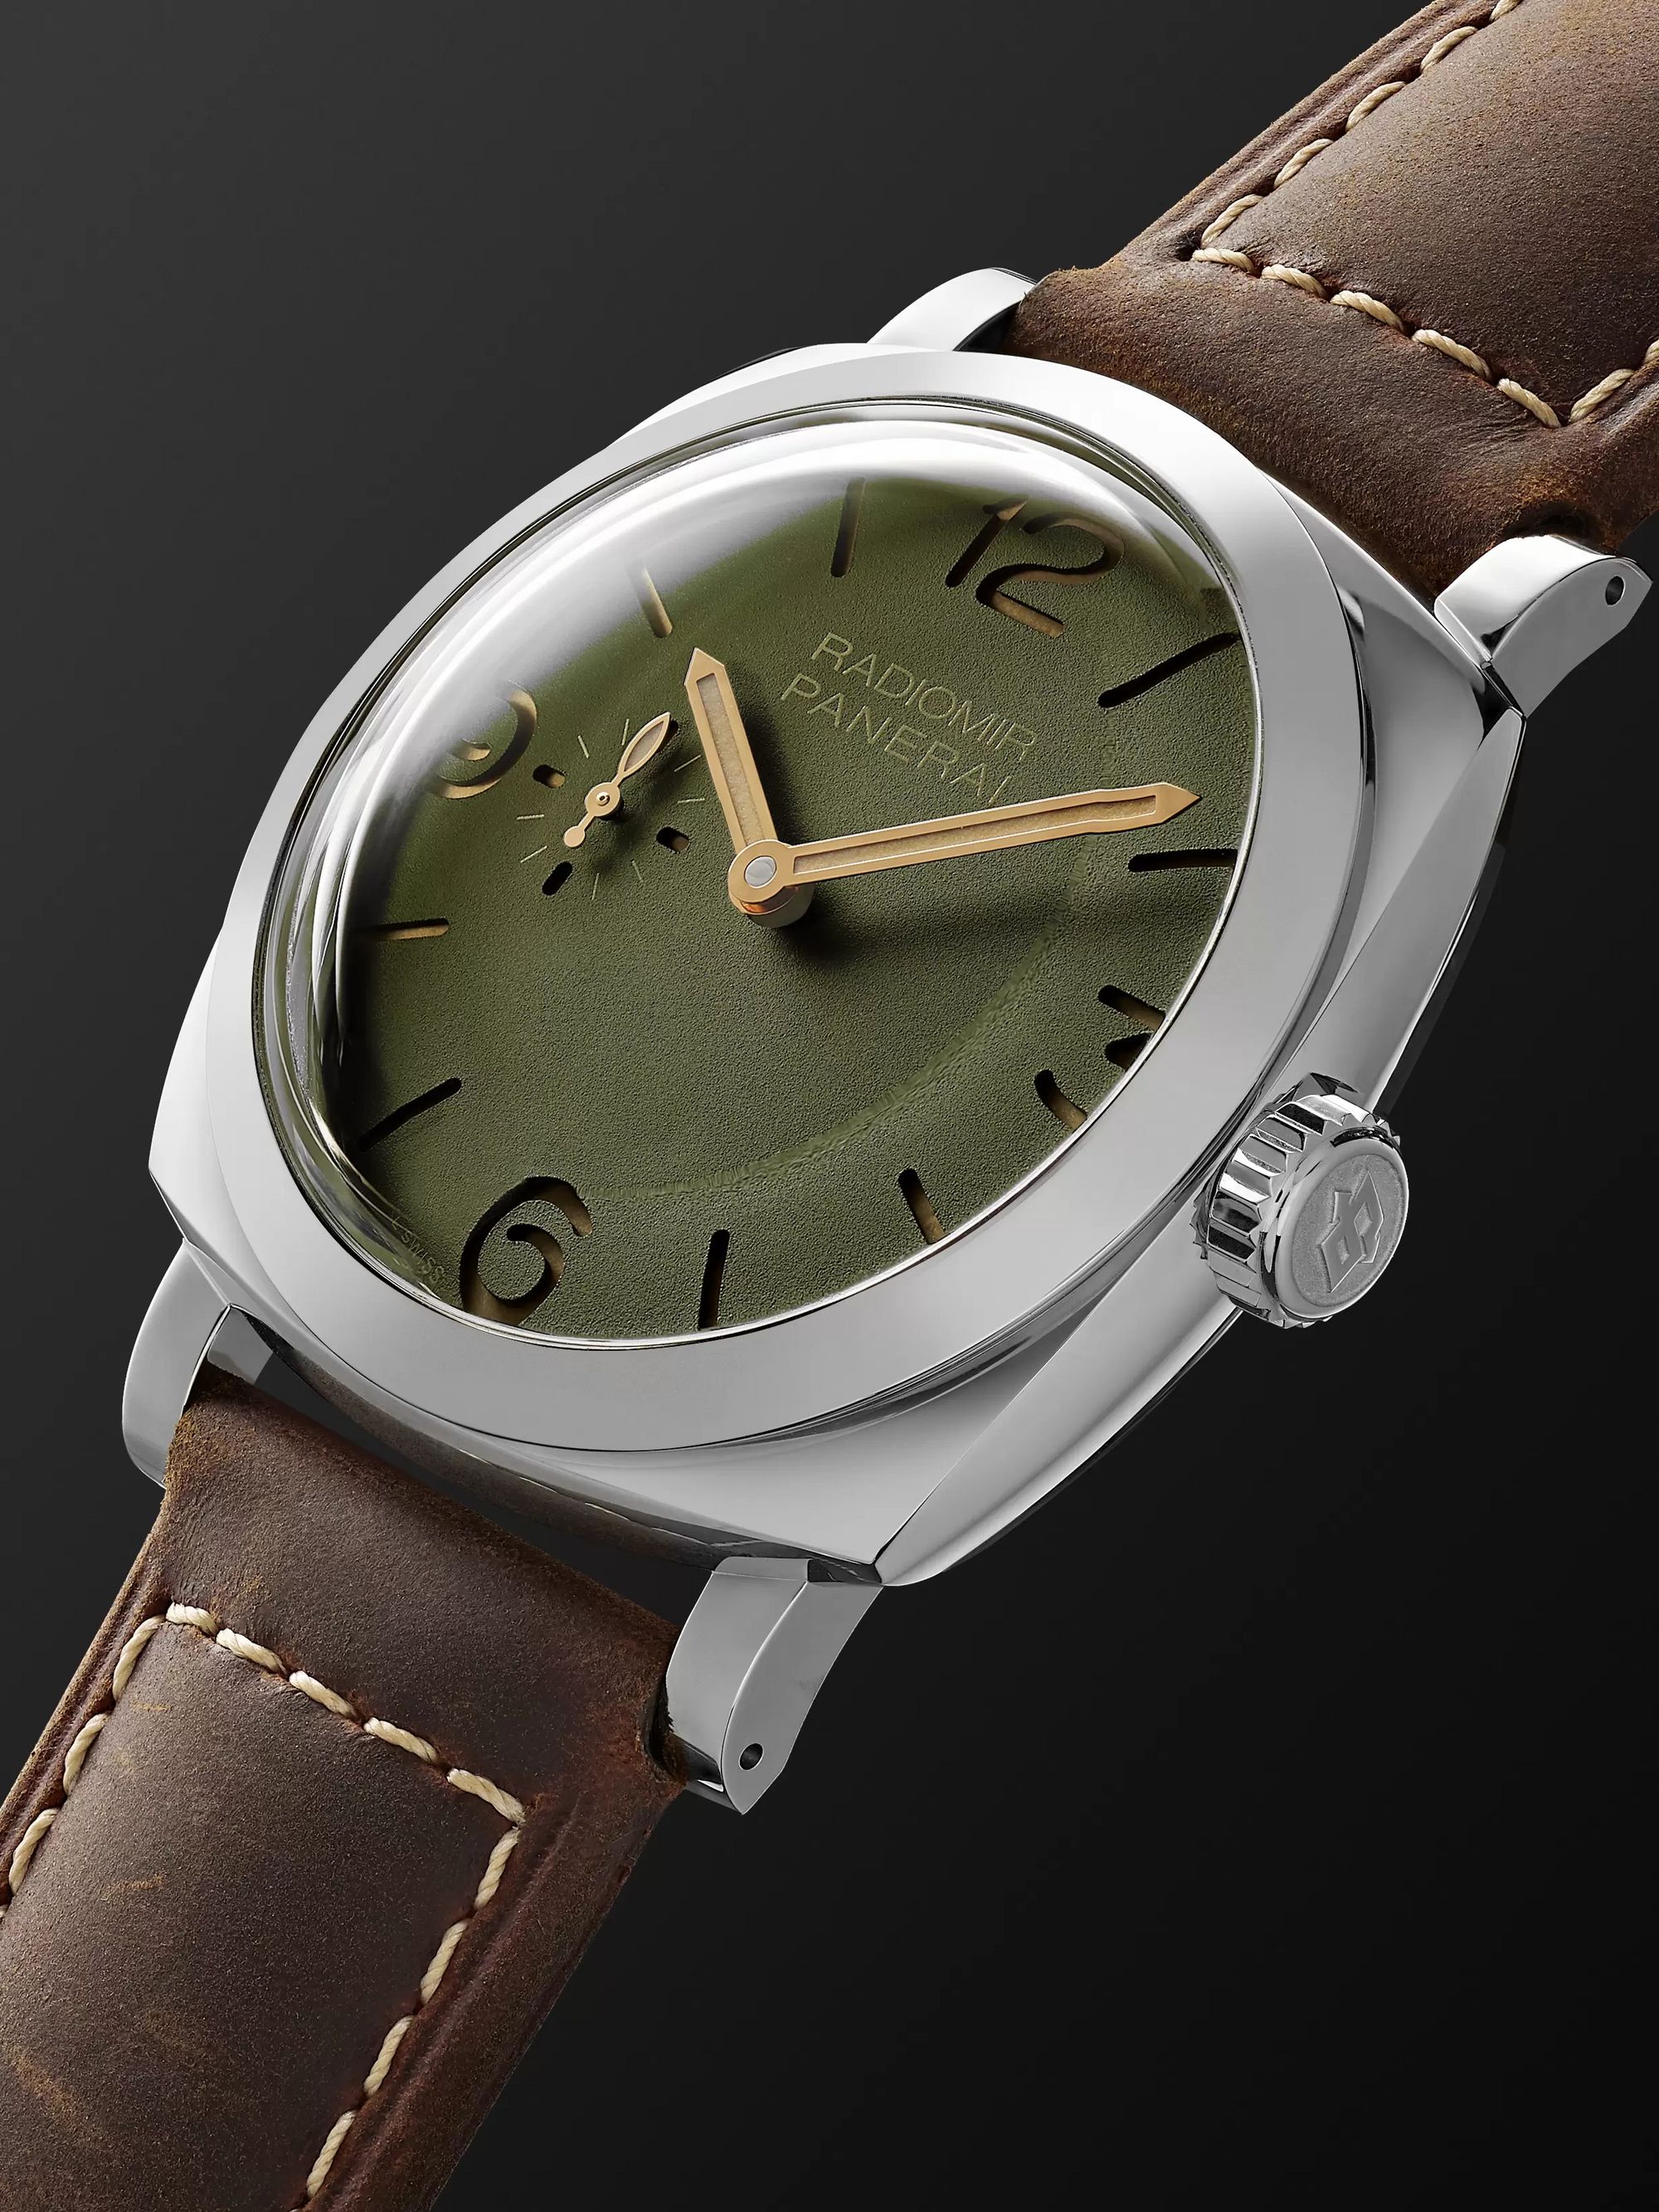 PANERAI Radiomir Automatic 45mm Stainless Steel and Leather Watch, Ref. No. PAM00995